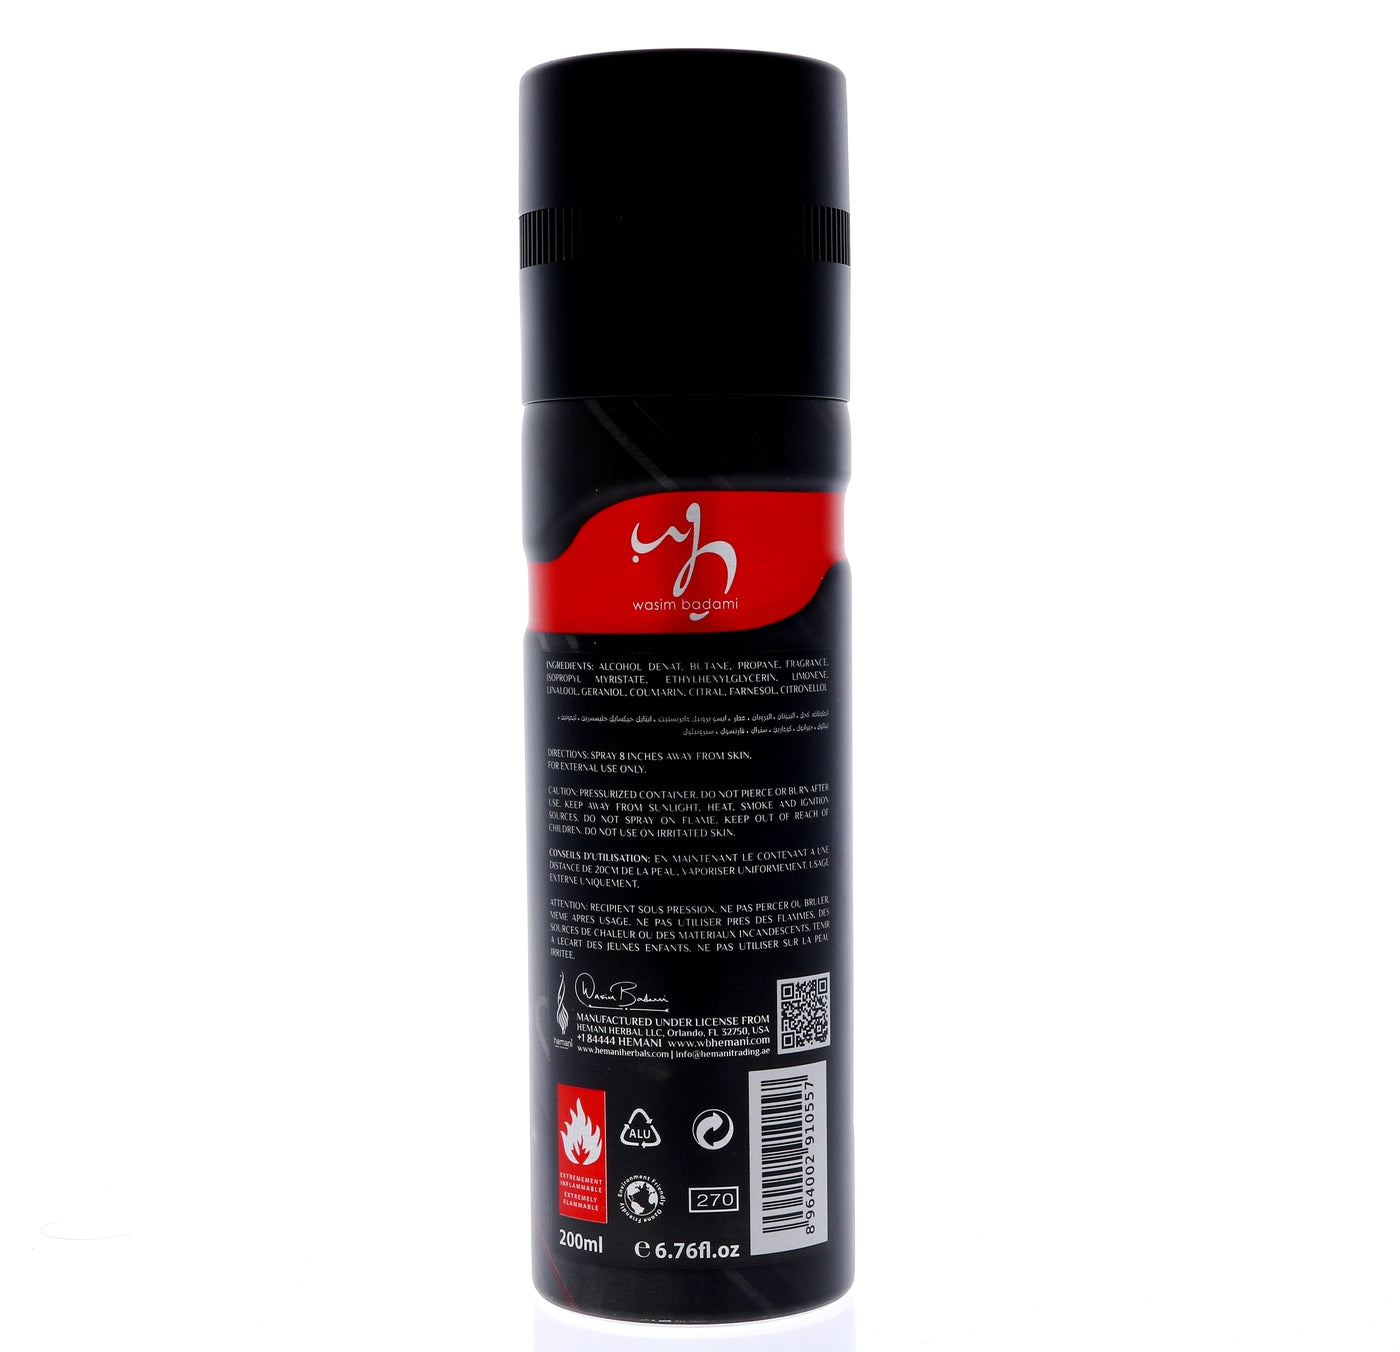 wb-deo-wise-monk-200ml-m-2